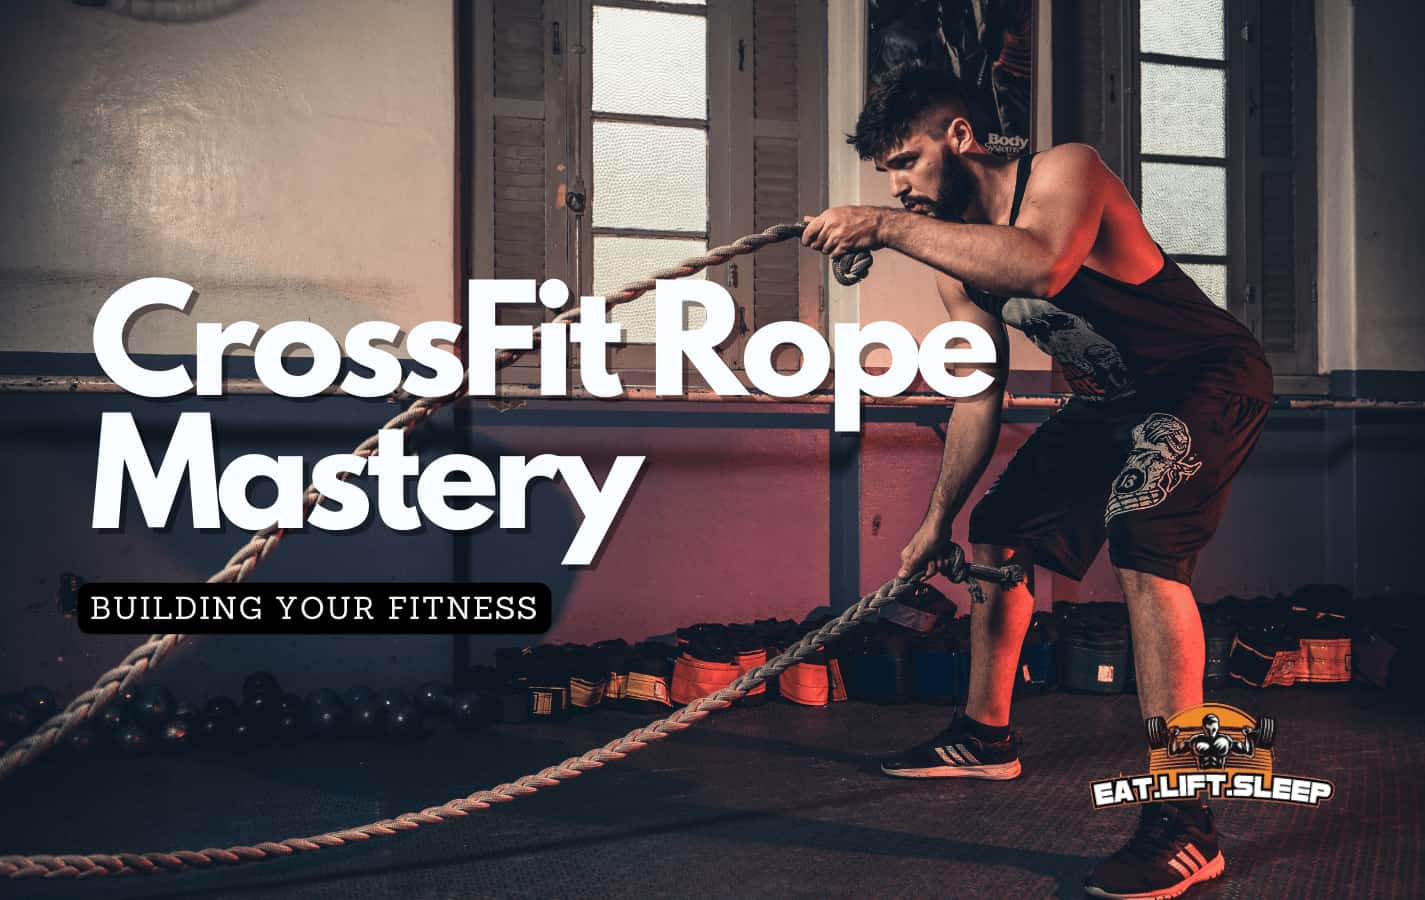 Man doing solid rope work in a CrossFit gym